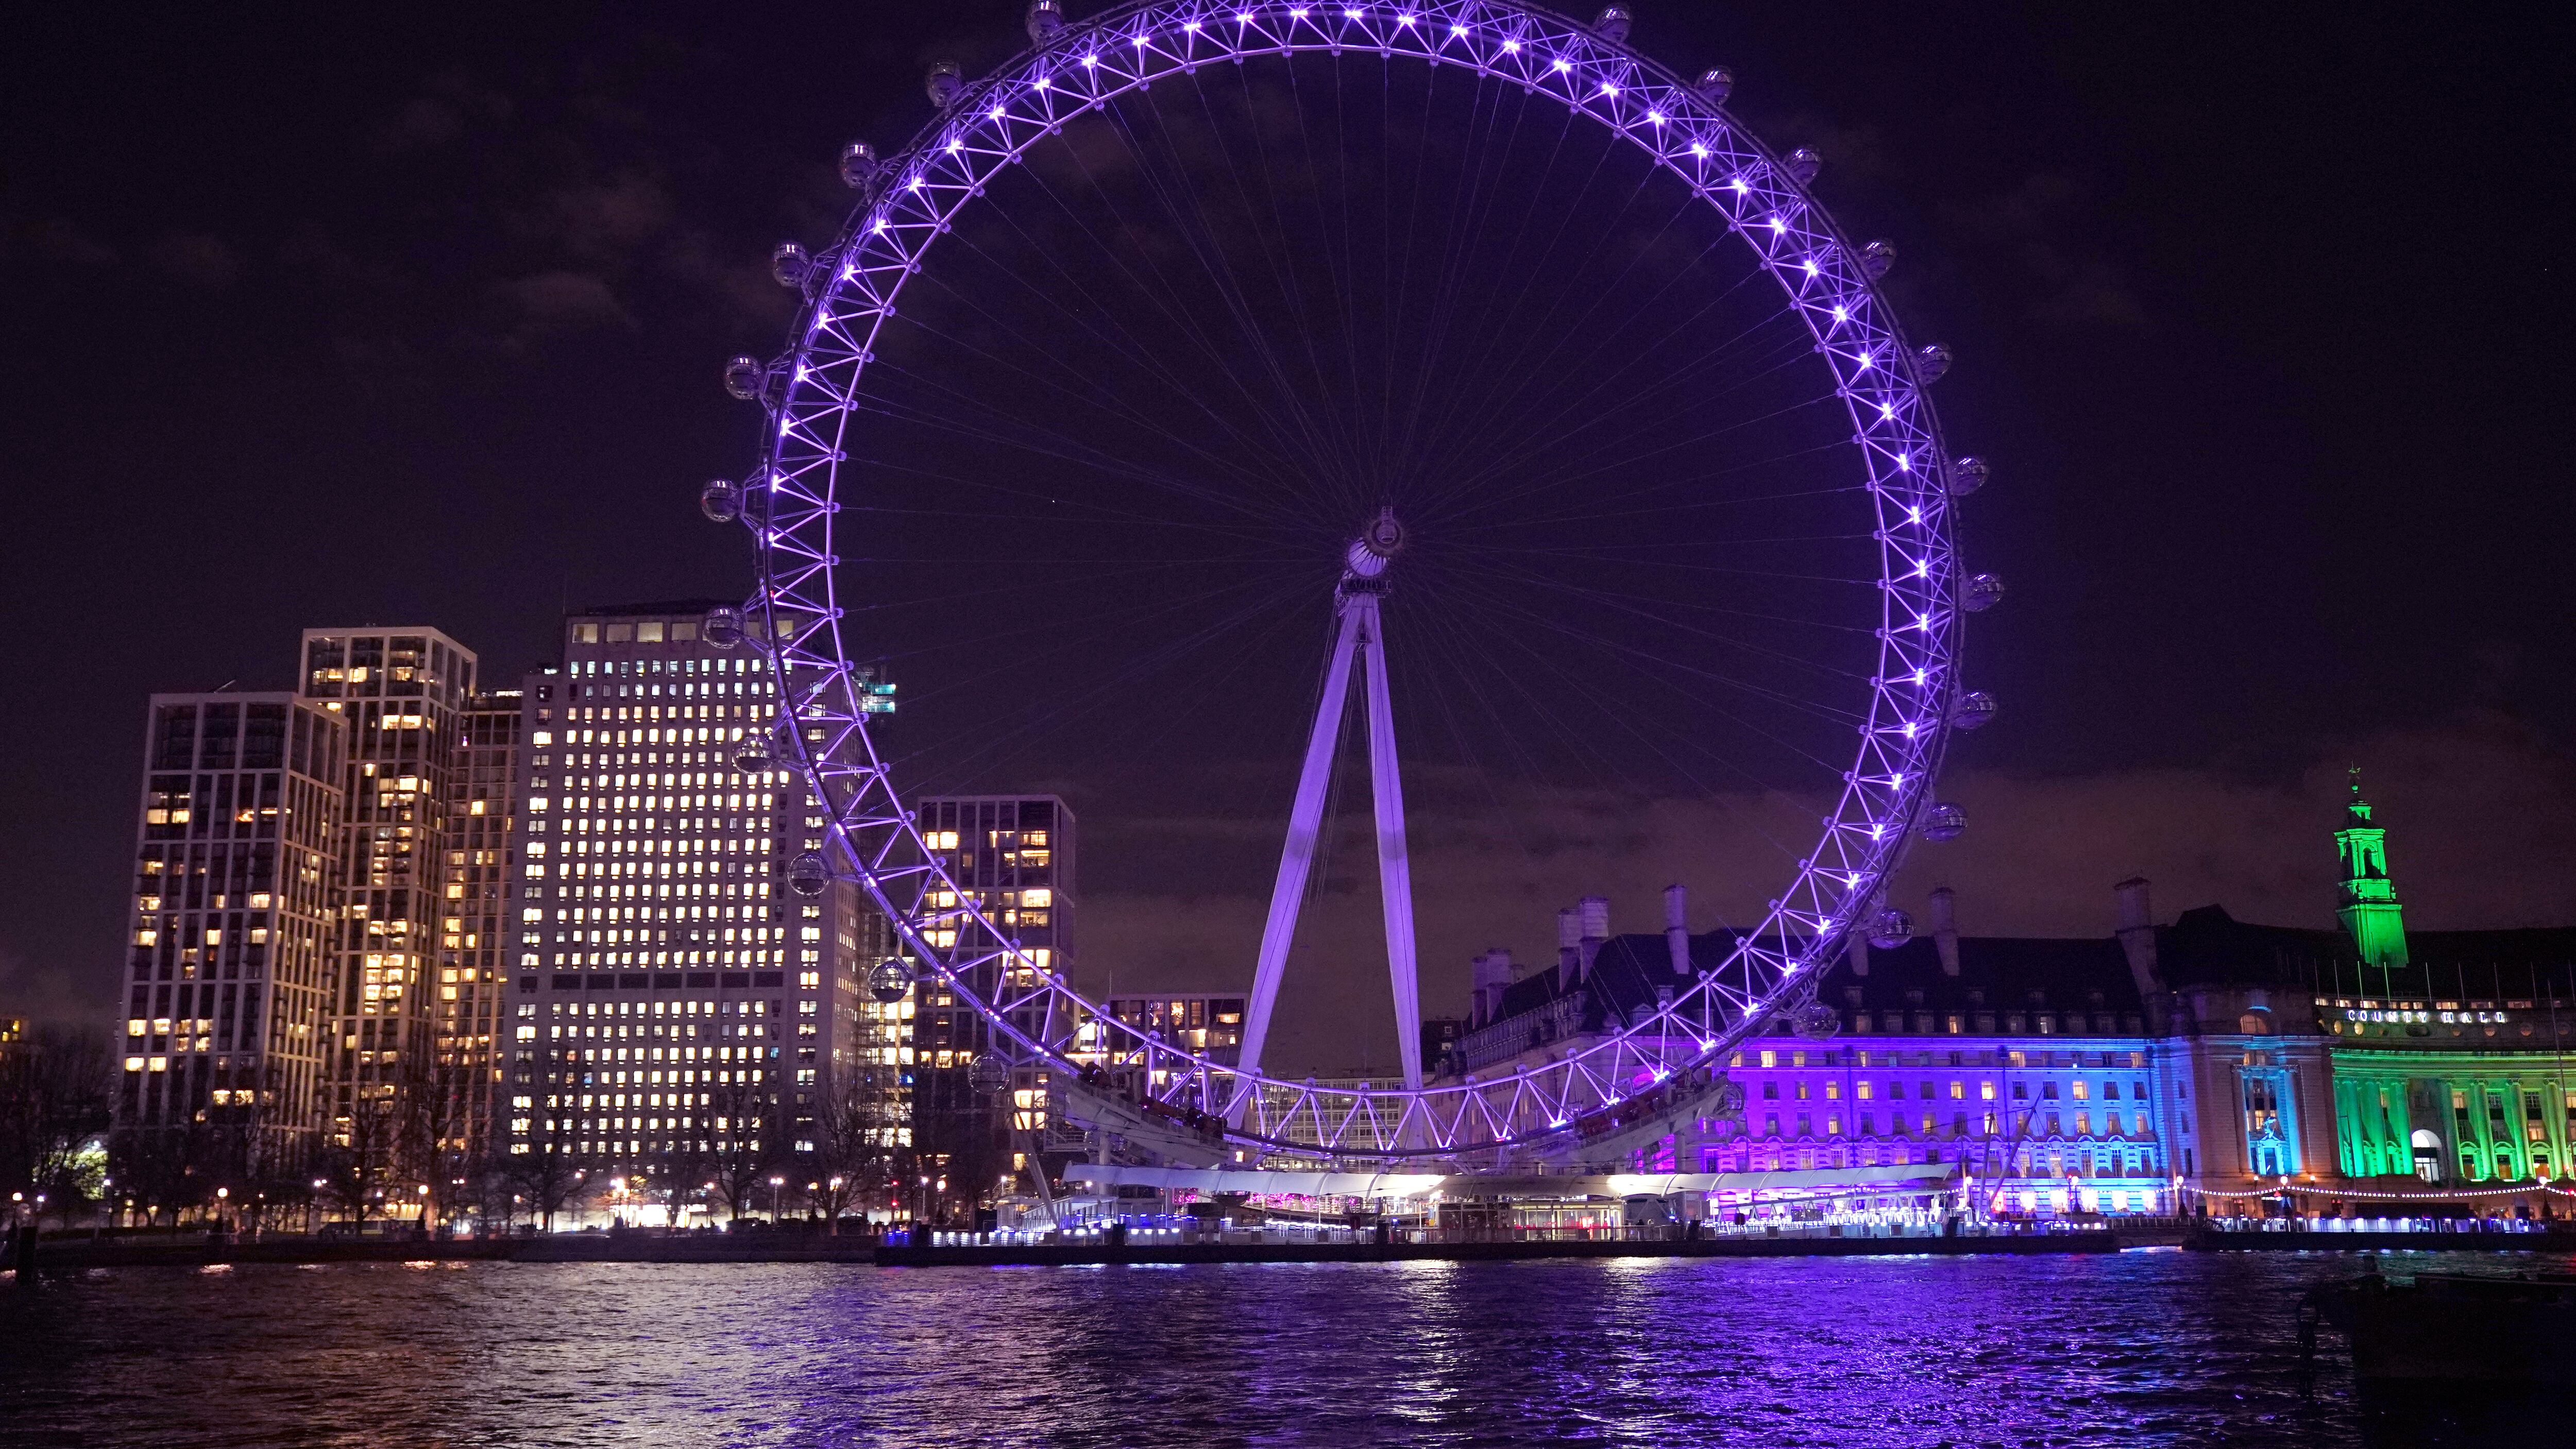 The London Eye in Westminster was among the landmarks lit up to make Holocaust Memorial Day